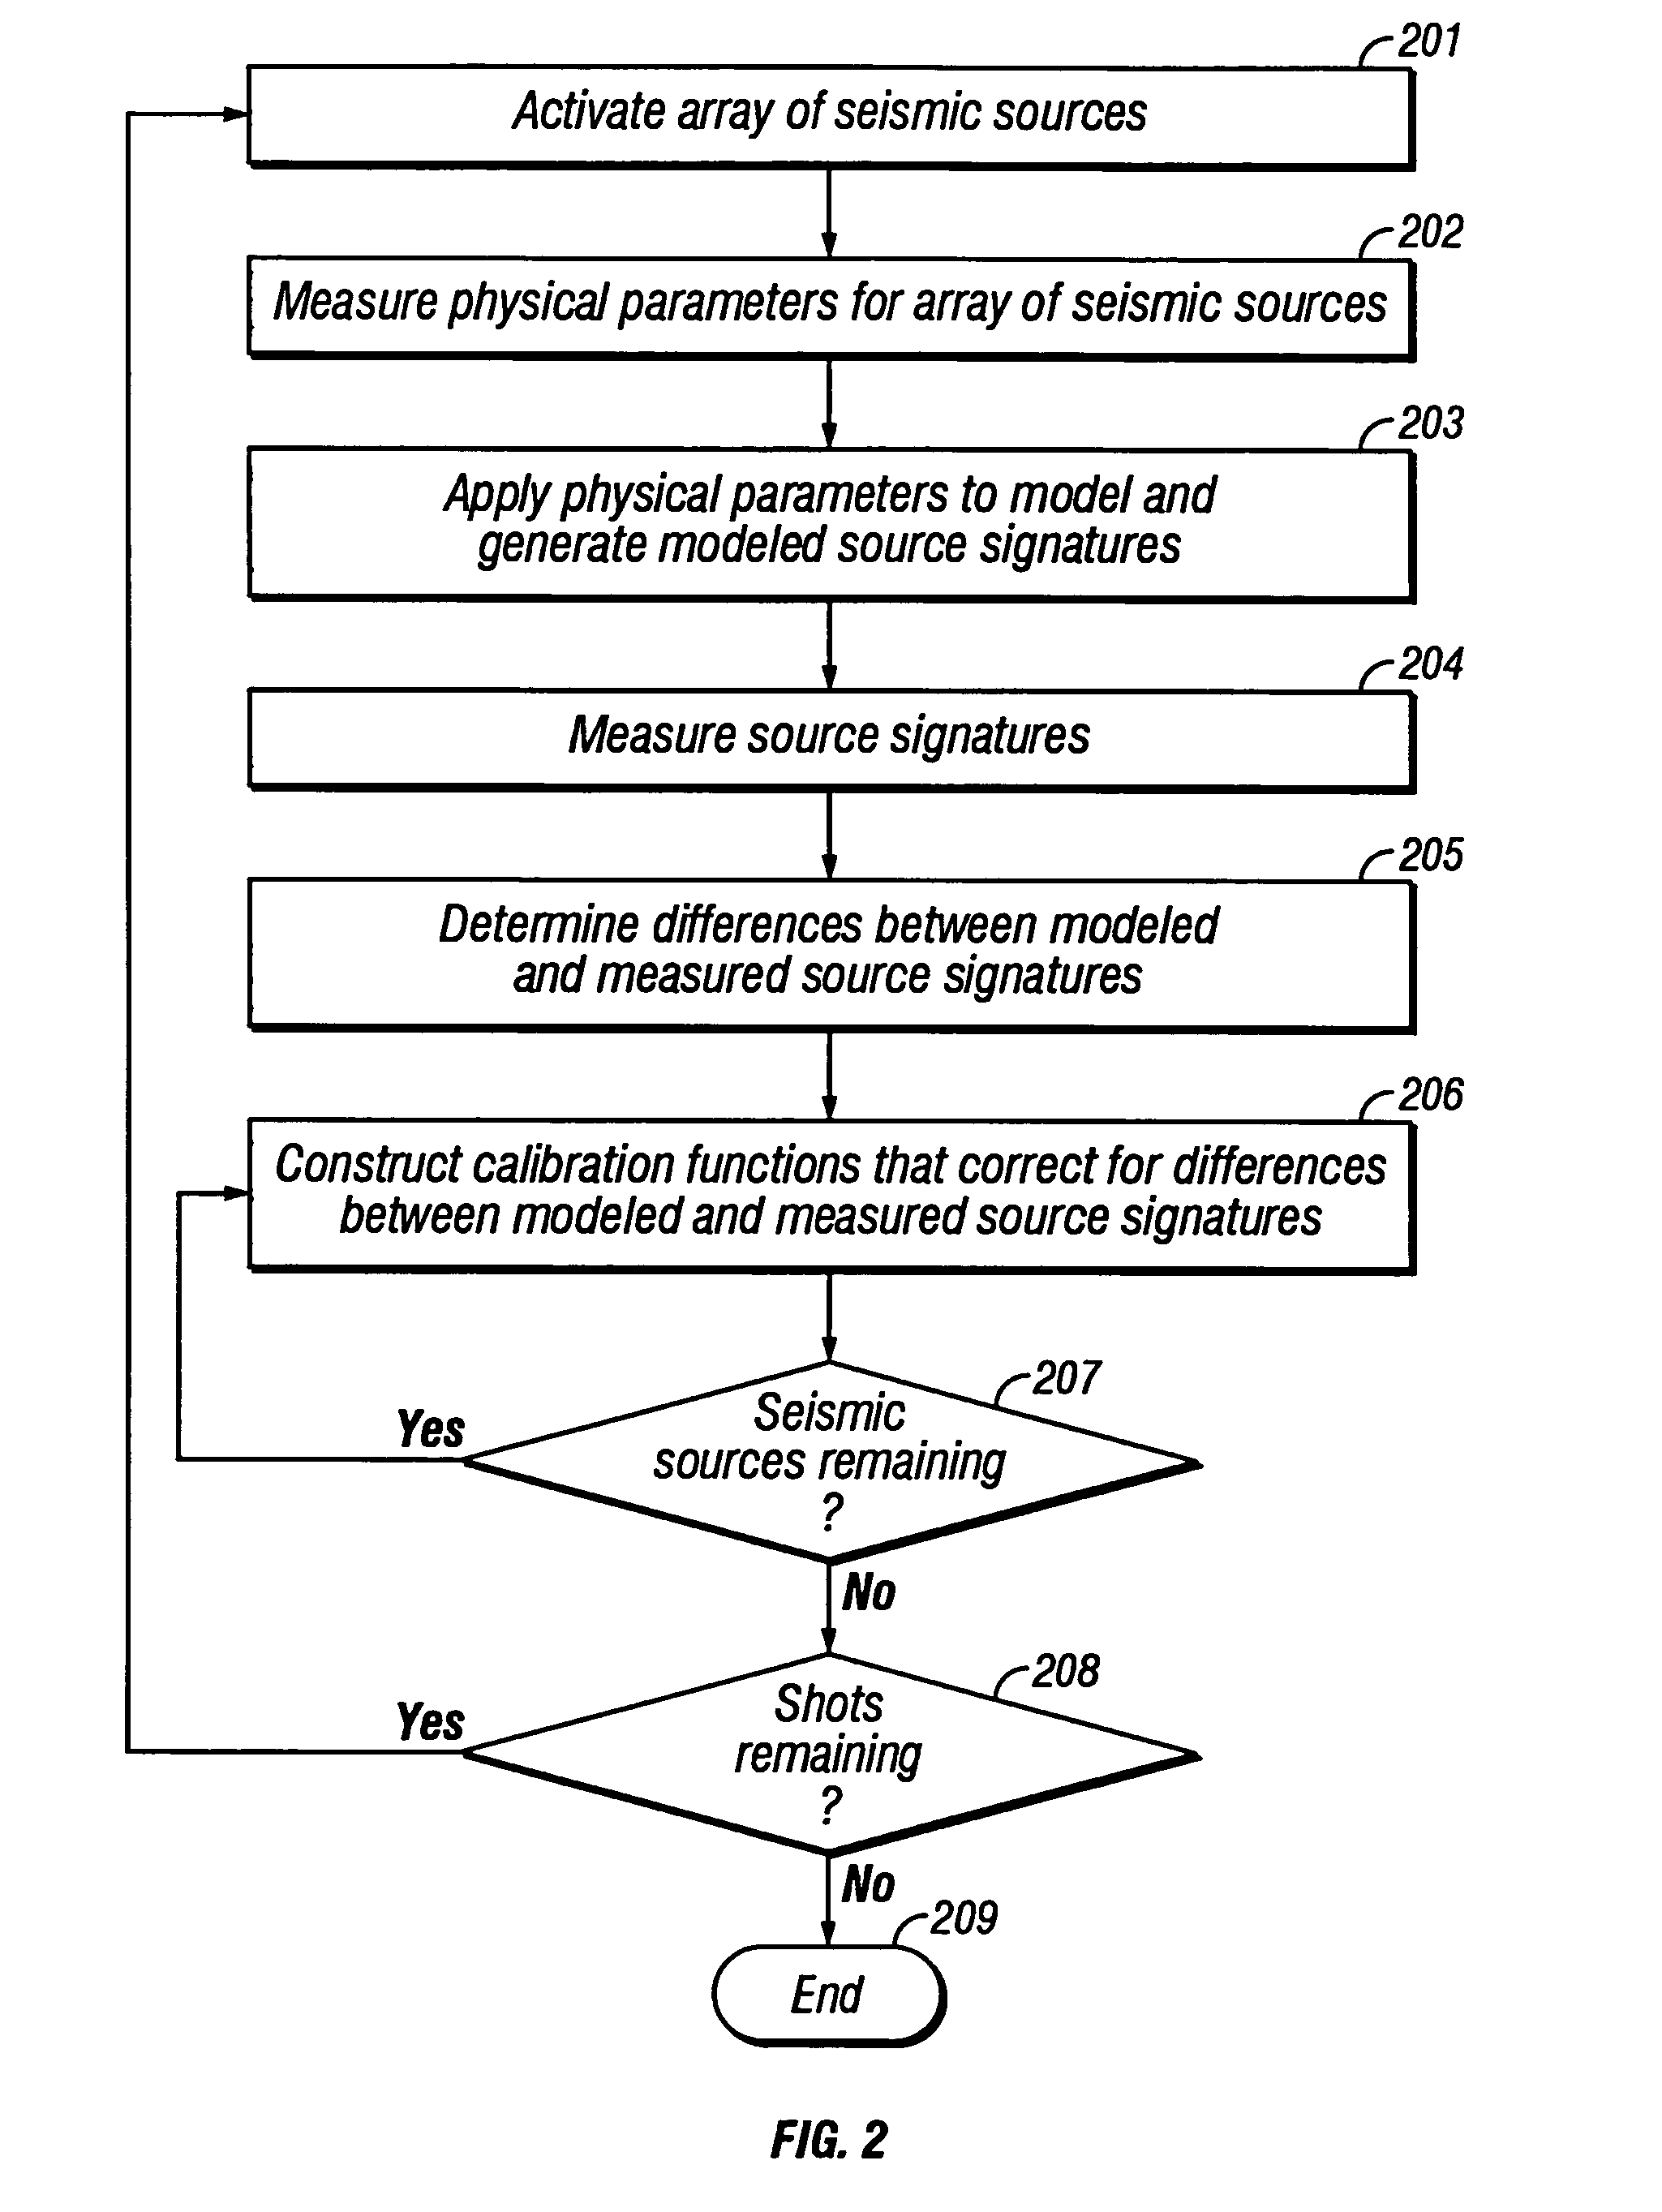 Method of seismic source monitoring using modeled source signatures with calibration functions